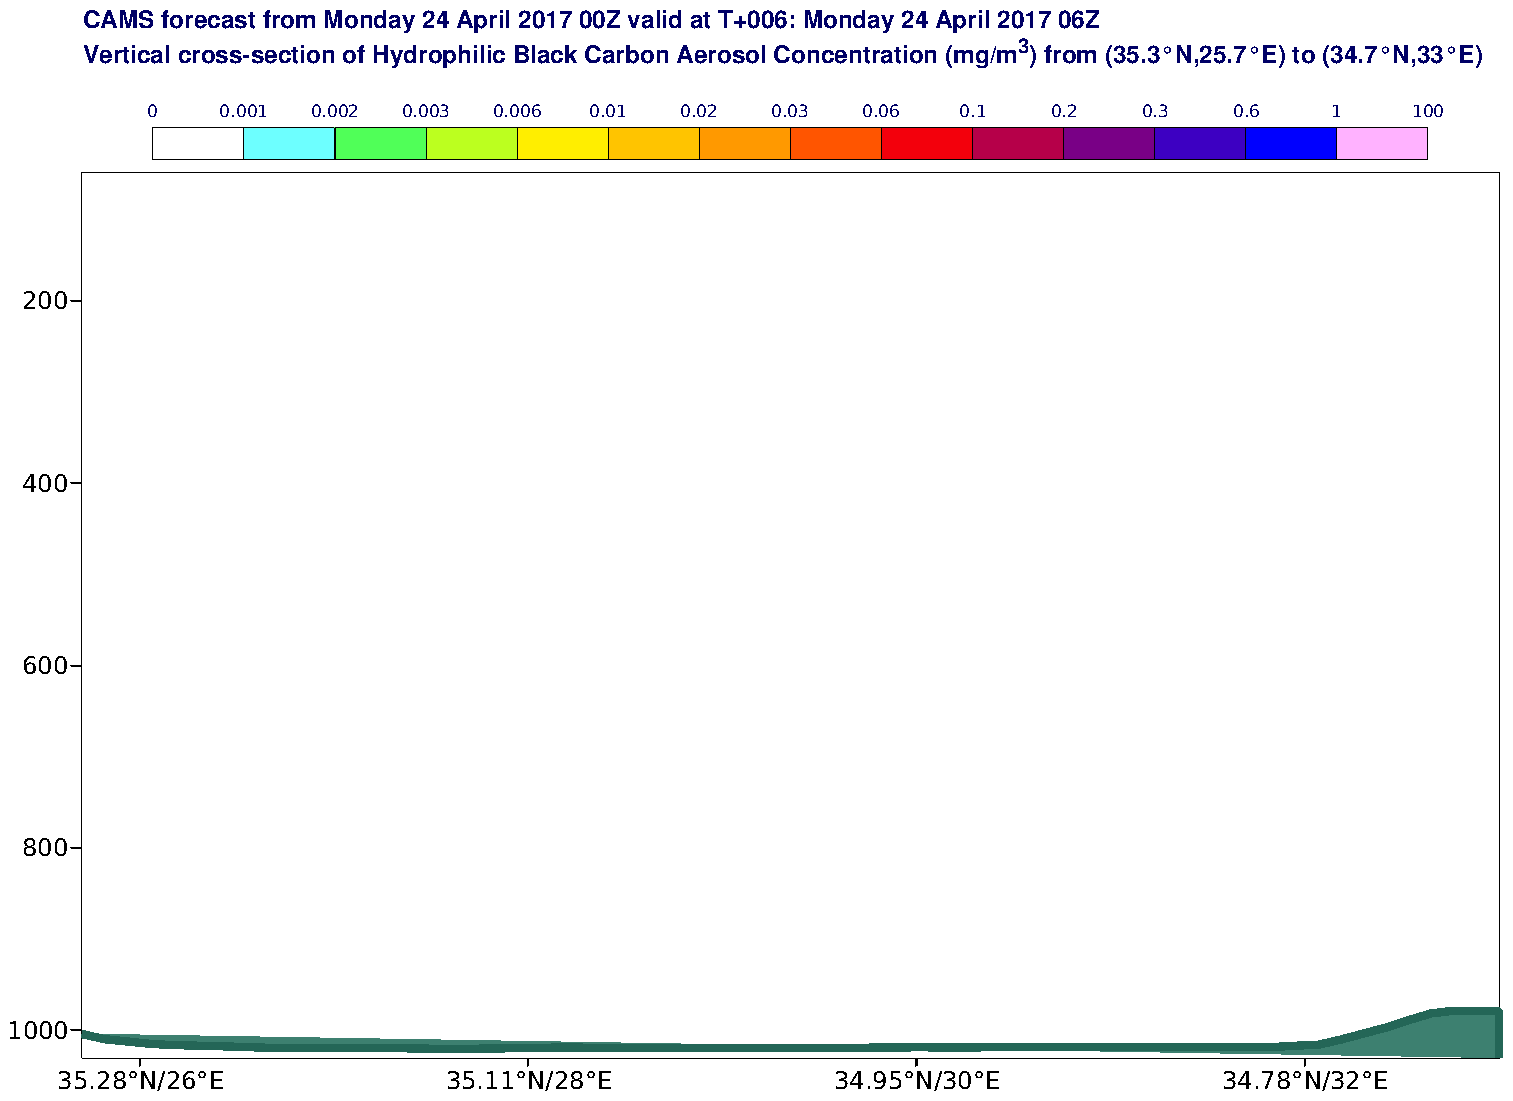 Vertical cross-section of Hydrophilic Black Carbon Aerosol Concentration (mg/m3) valid at T6 - 2017-04-24 06:00